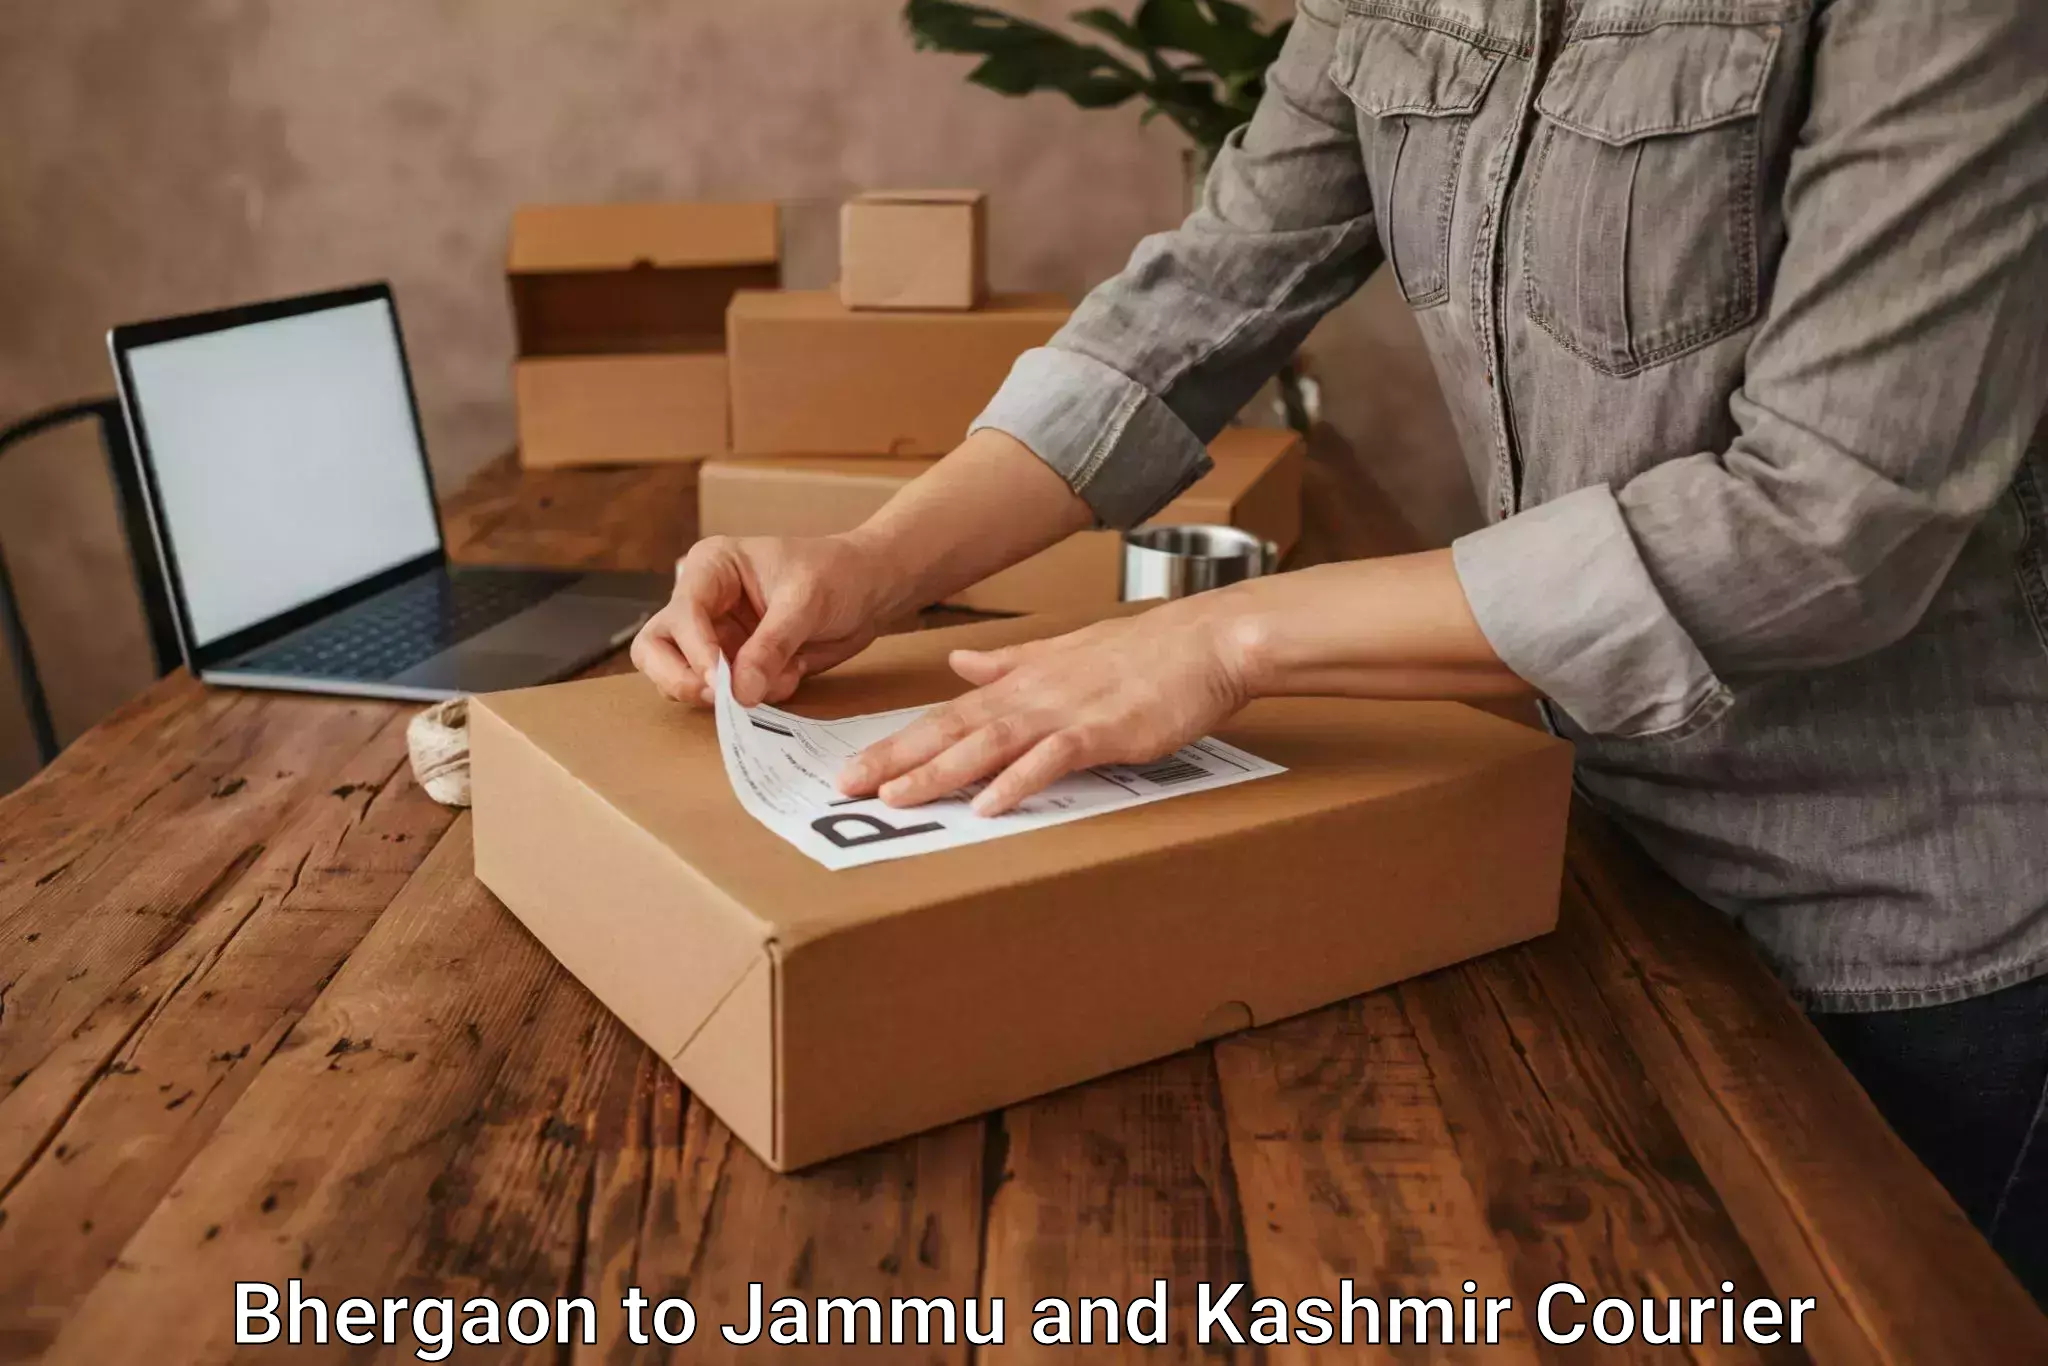 Doorstep delivery service Bhergaon to Shopian